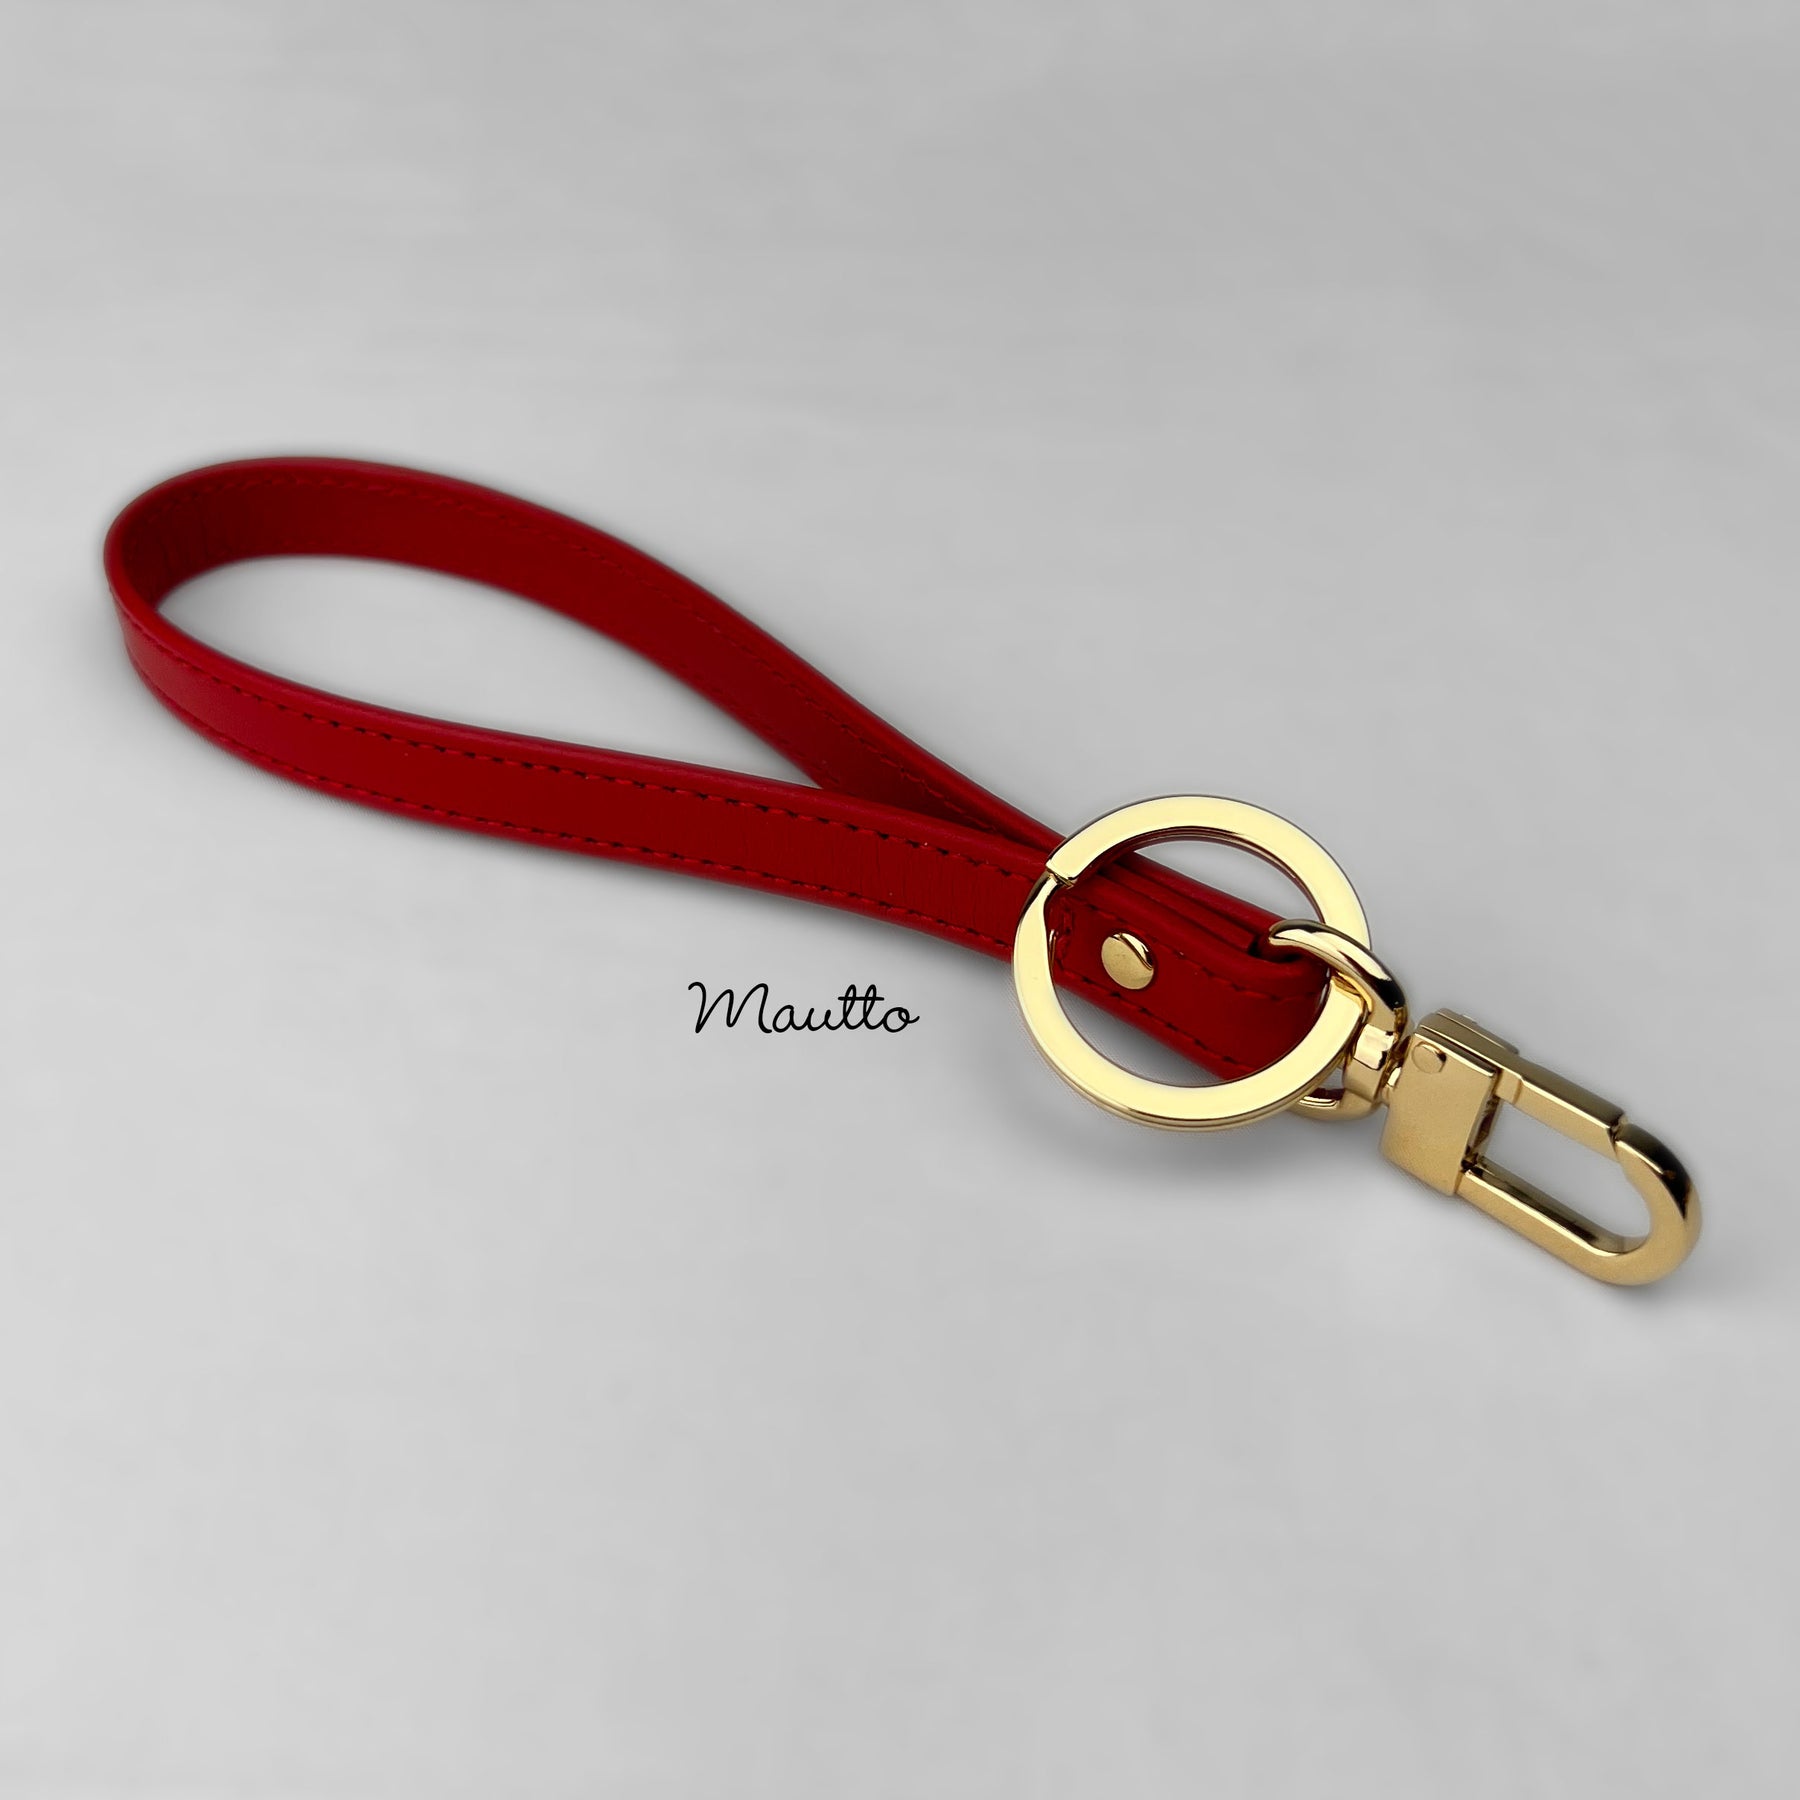 Mautto Wallet Chain / Key Tether